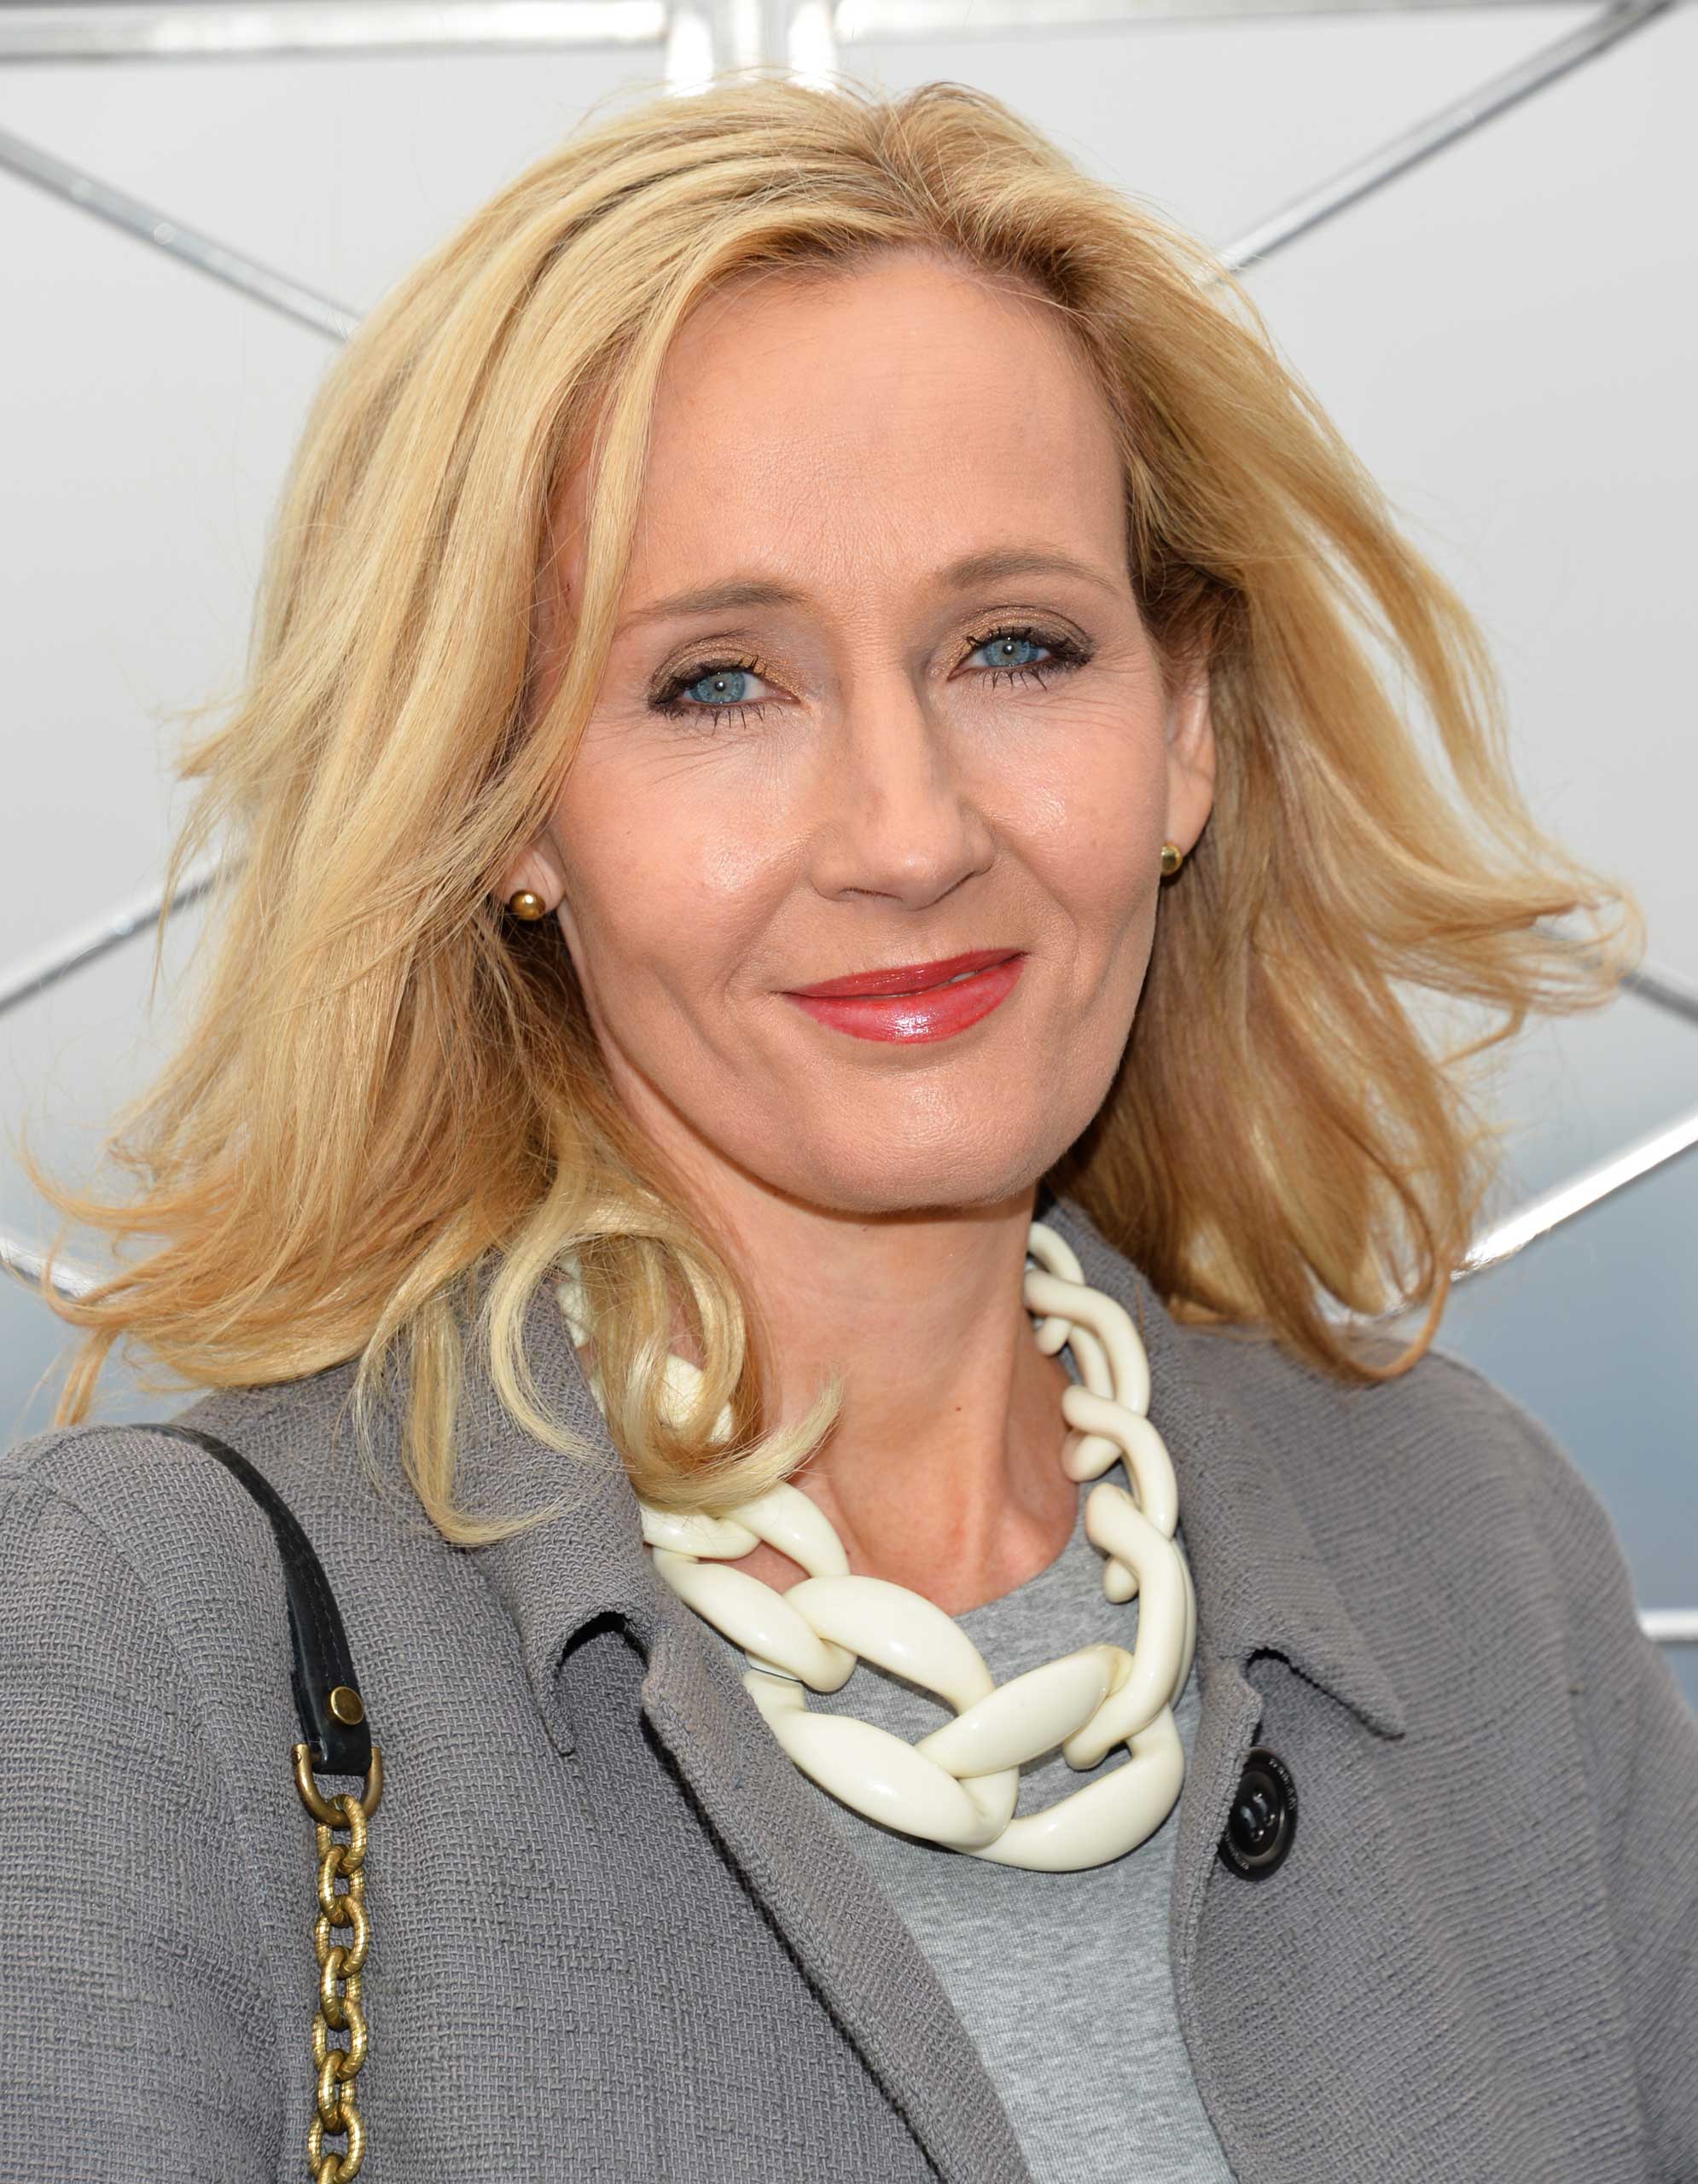 Author J.K. Rowling appears at the Empire State Building observation deck during a lighting ceremony and to mark the launch of her non-profit children's organization Lumos, in New York, on April 9, 2015, (Evan Agostini—Invision/AP)